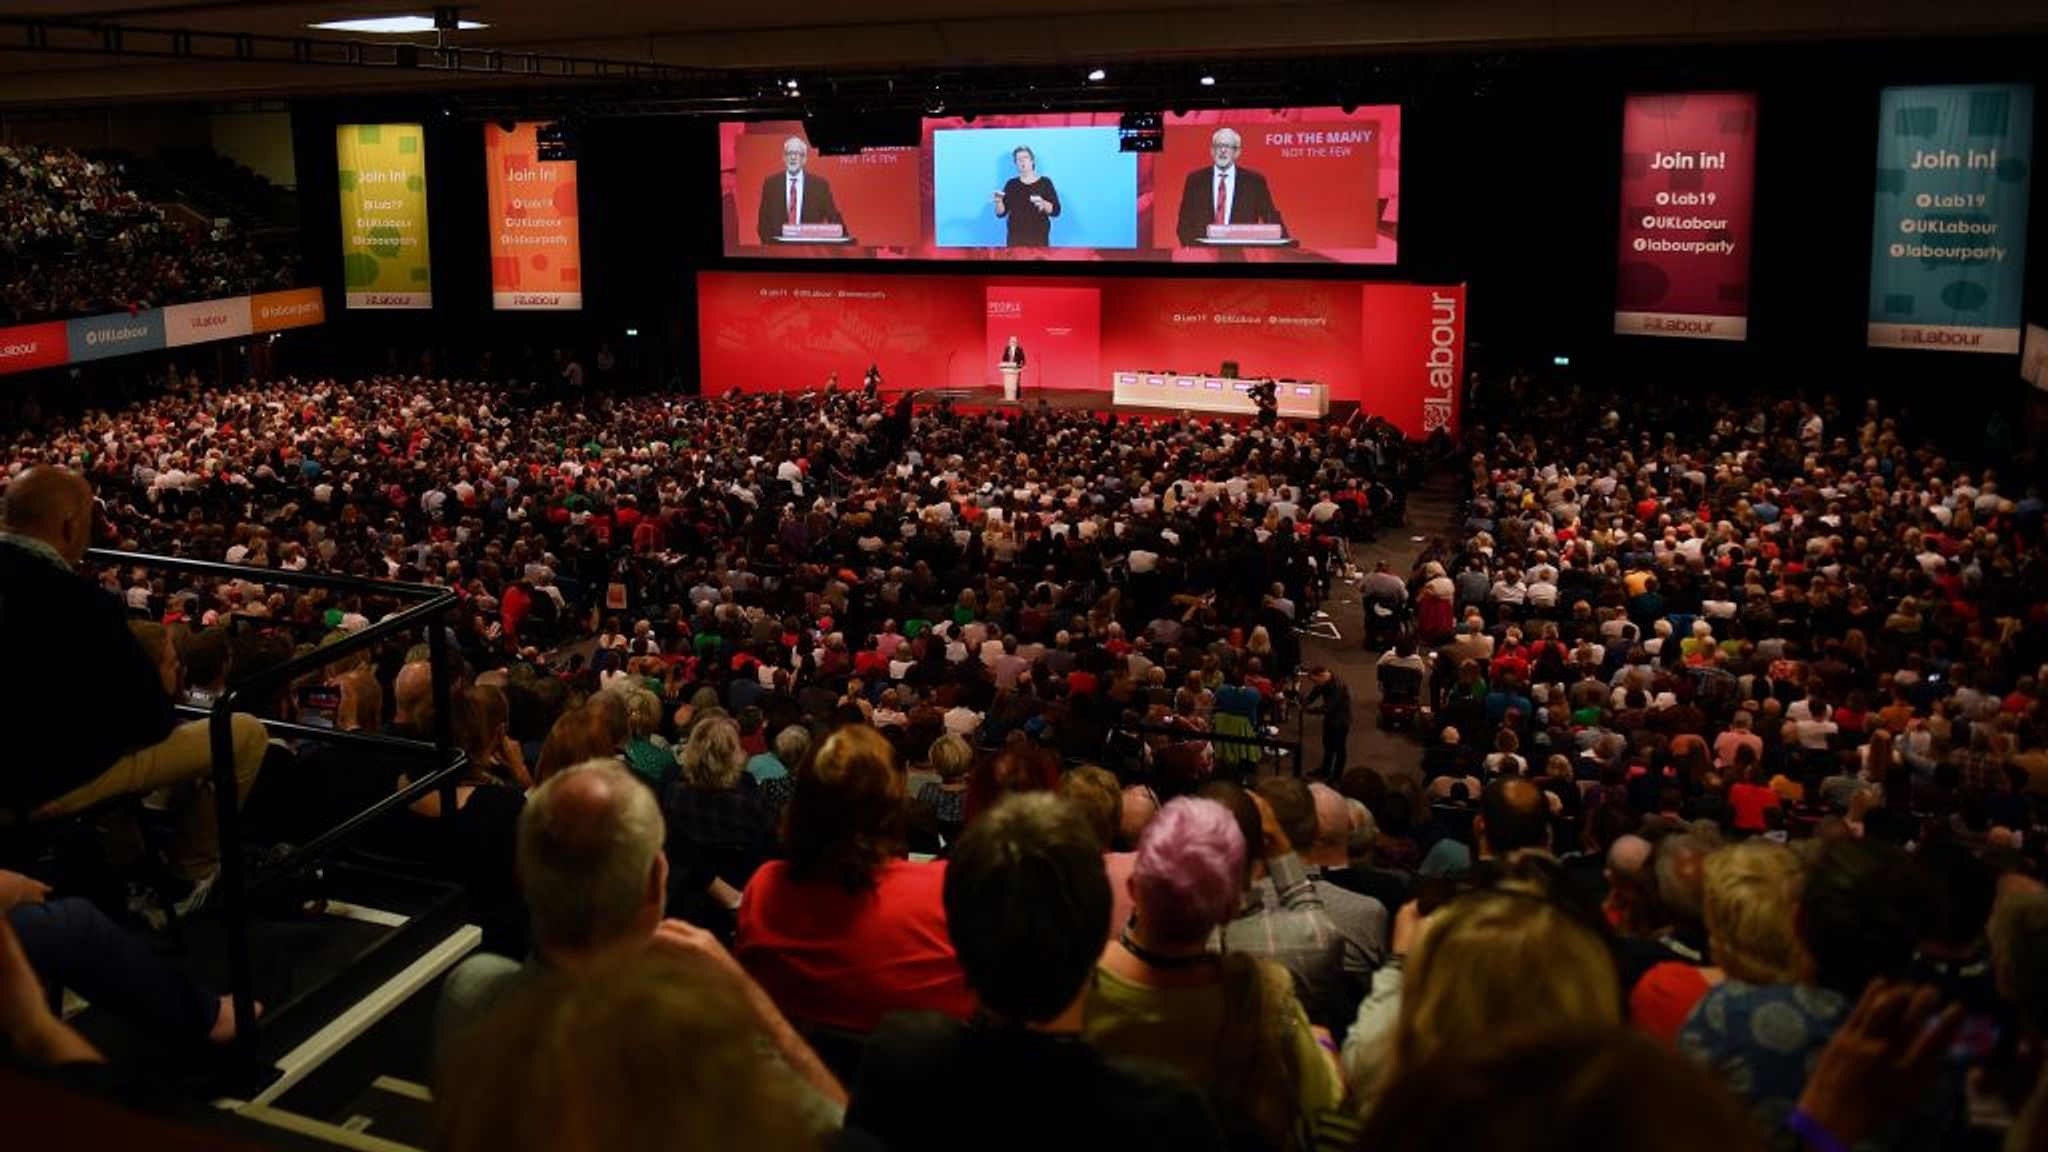 Labour to campaign for free movement at next election after conference